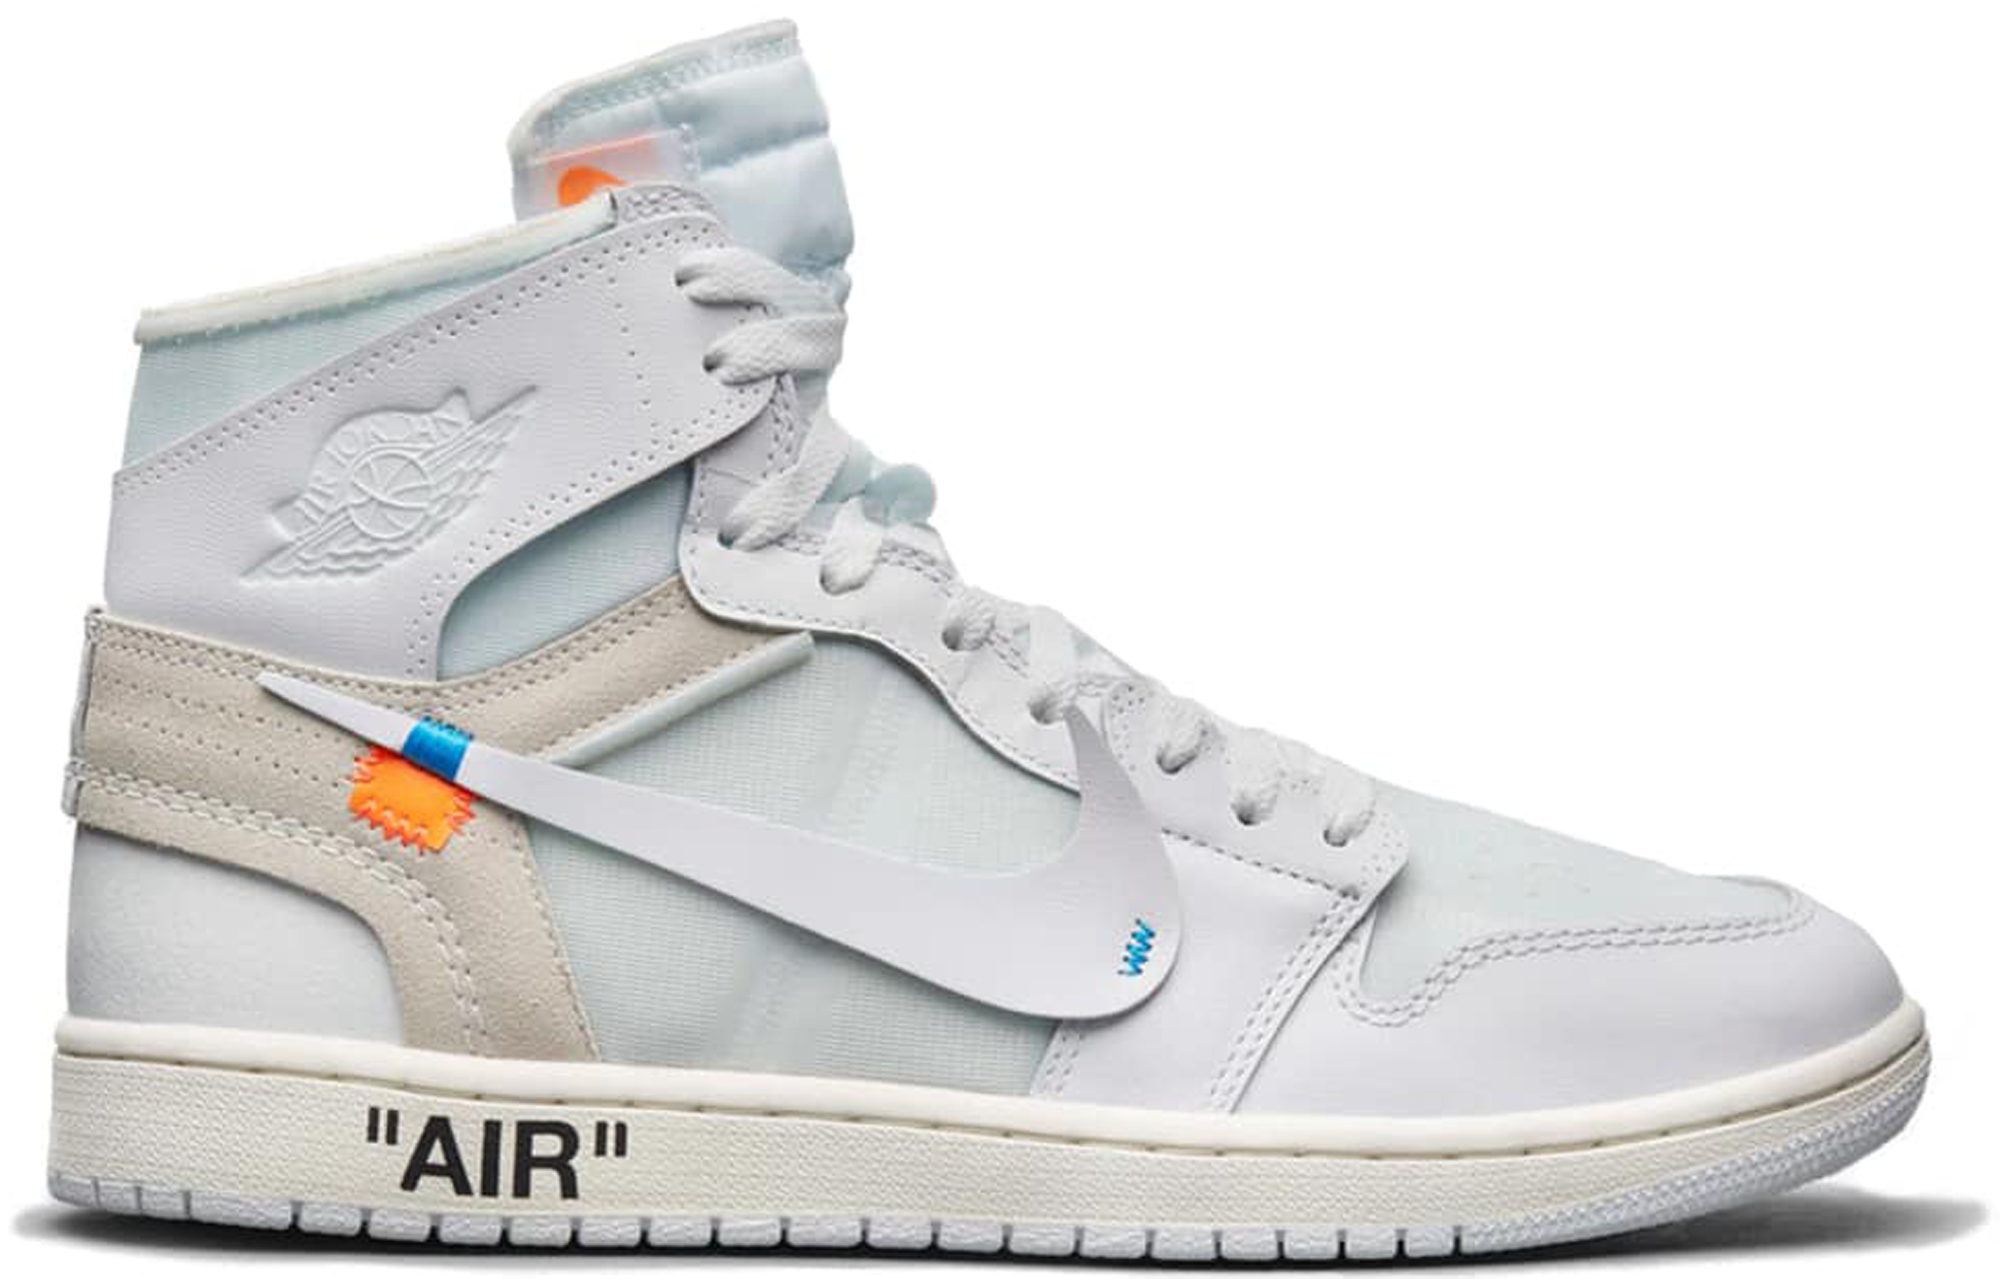 Most Affordable Nike Off-White Shoes - StockX News